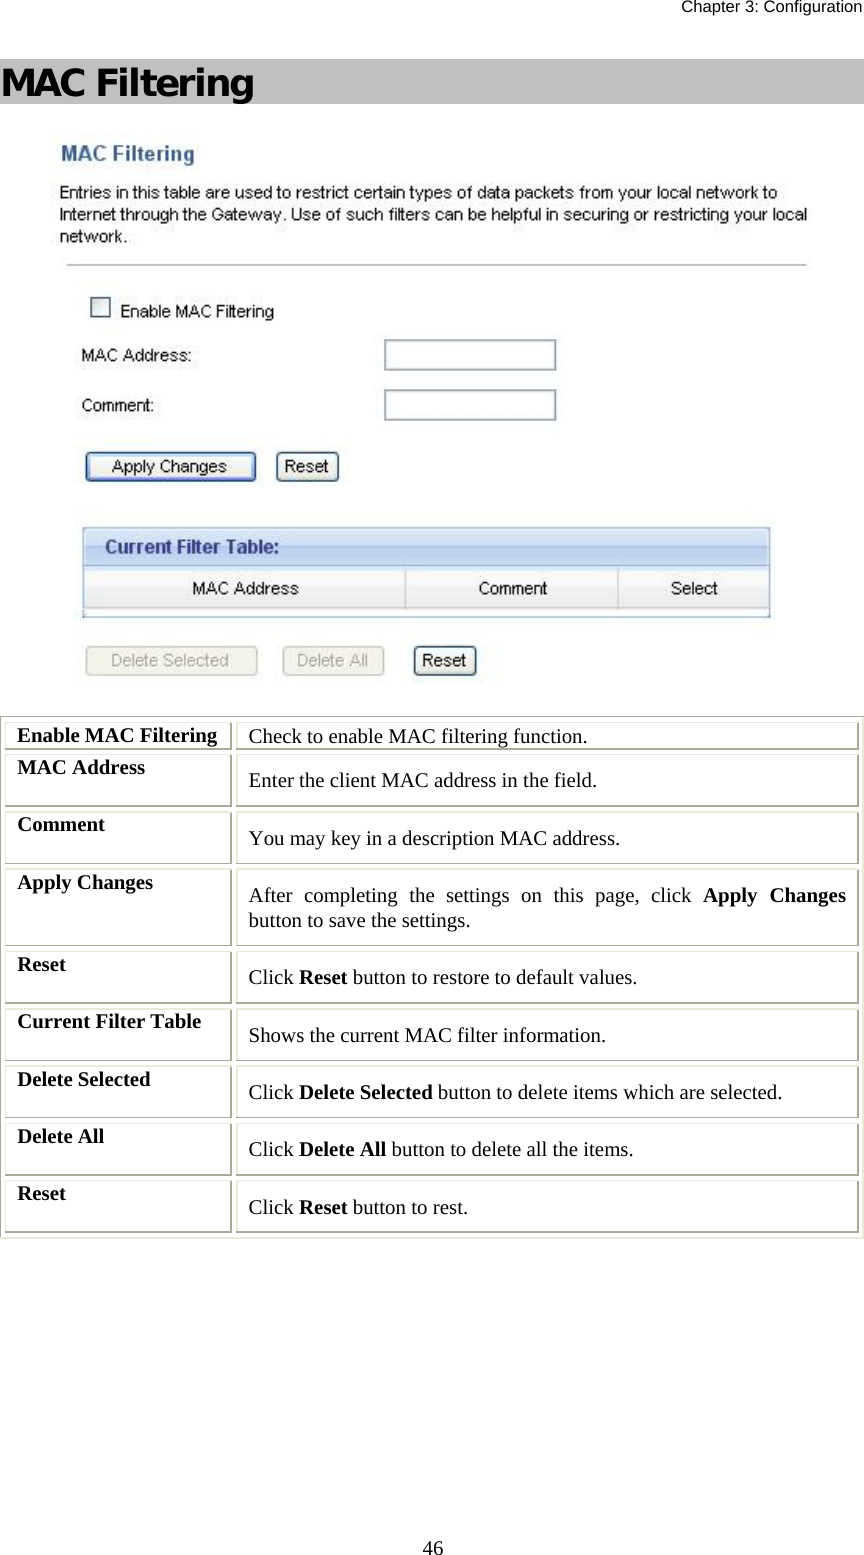   Chapter 3: Configuration  46MAC Filtering  Enable MAC Filtering  Check to enable MAC filtering function. MAC Address  Enter the client MAC address in the field.   Comment  You may key in a description MAC address. Apply Changes  After completing the settings on this page, click Apply Changes button to save the settings. Reset  Click Reset button to restore to default values. Current Filter Table  Shows the current MAC filter information. Delete Selected  Click Delete Selected button to delete items which are selected. Delete All  Click Delete All button to delete all the items. Reset  Click Reset button to rest.  